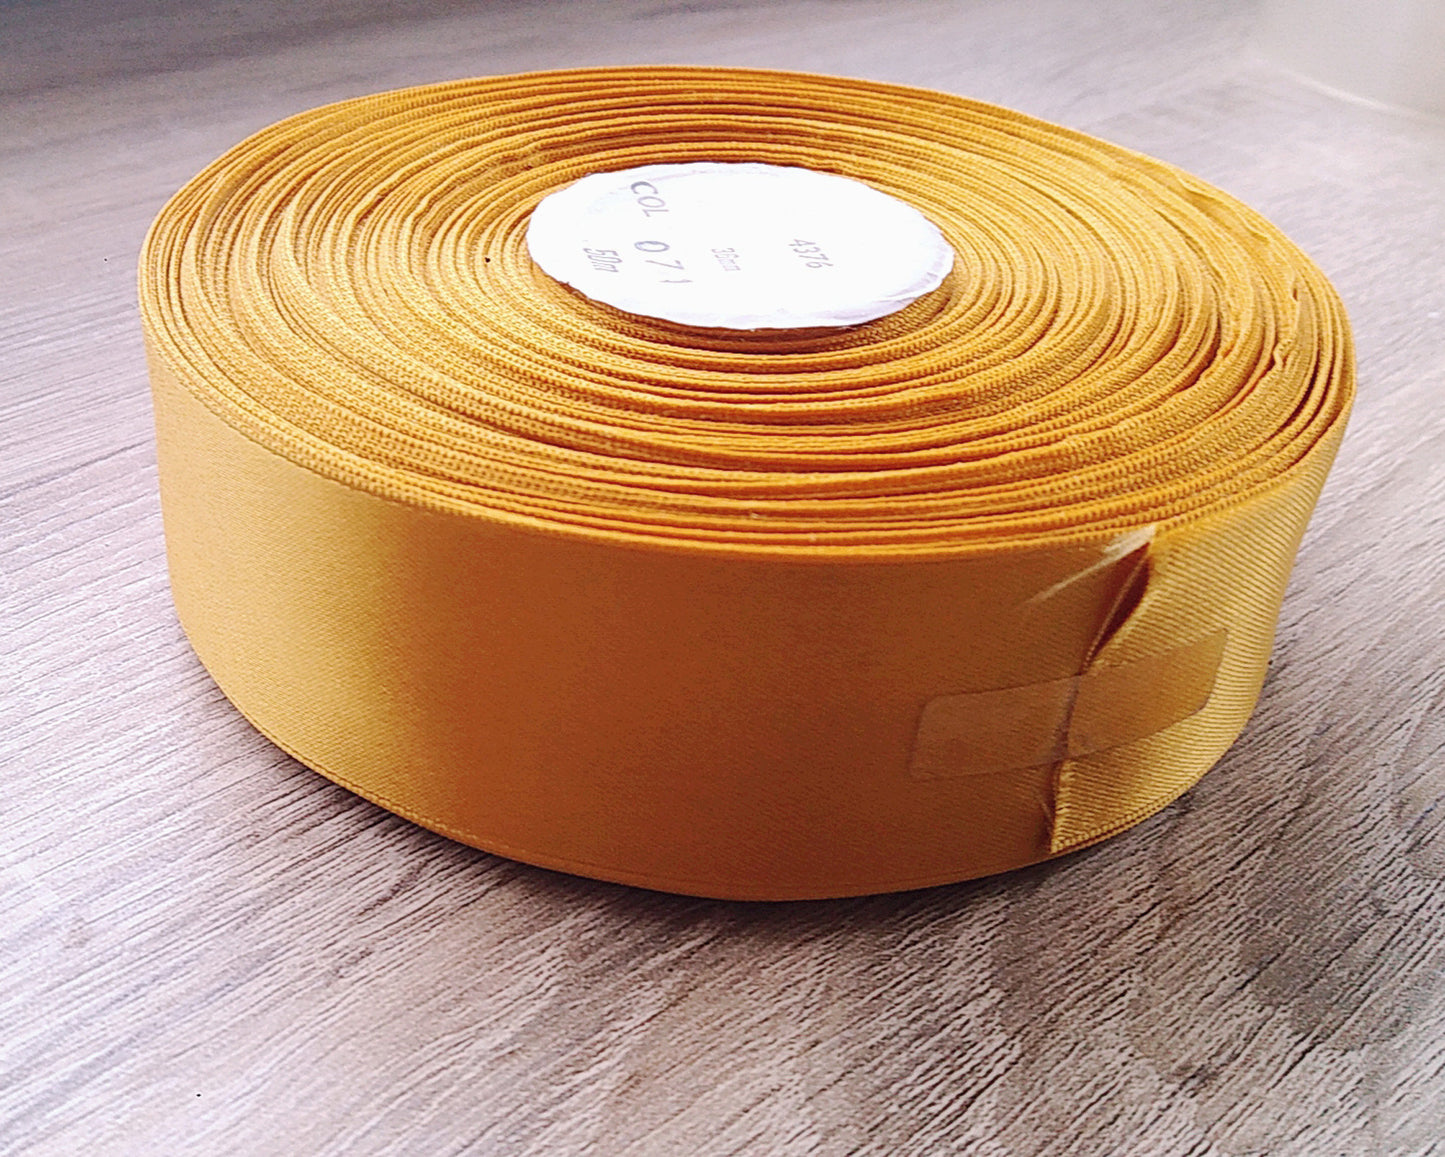 Ribbon- Gold Satin - 36mm wide - 50 meter roll